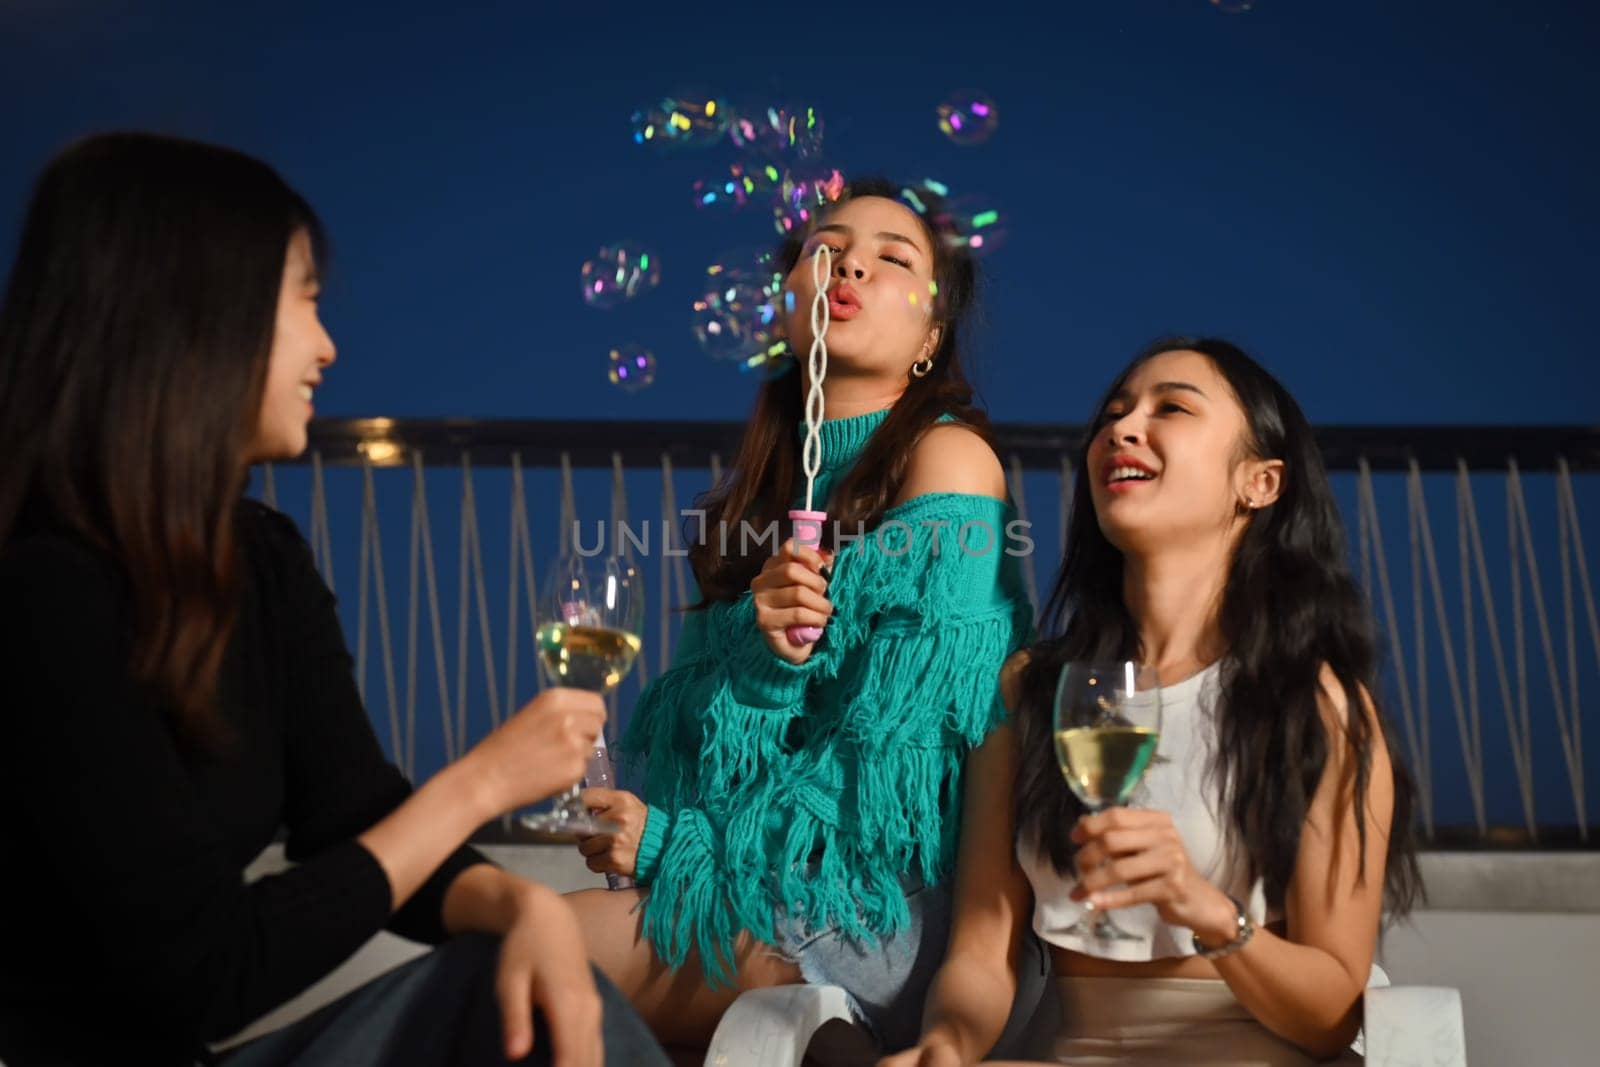 Group of young people having fun at outdoor rooftop party with drinks and blowing soap bubbles